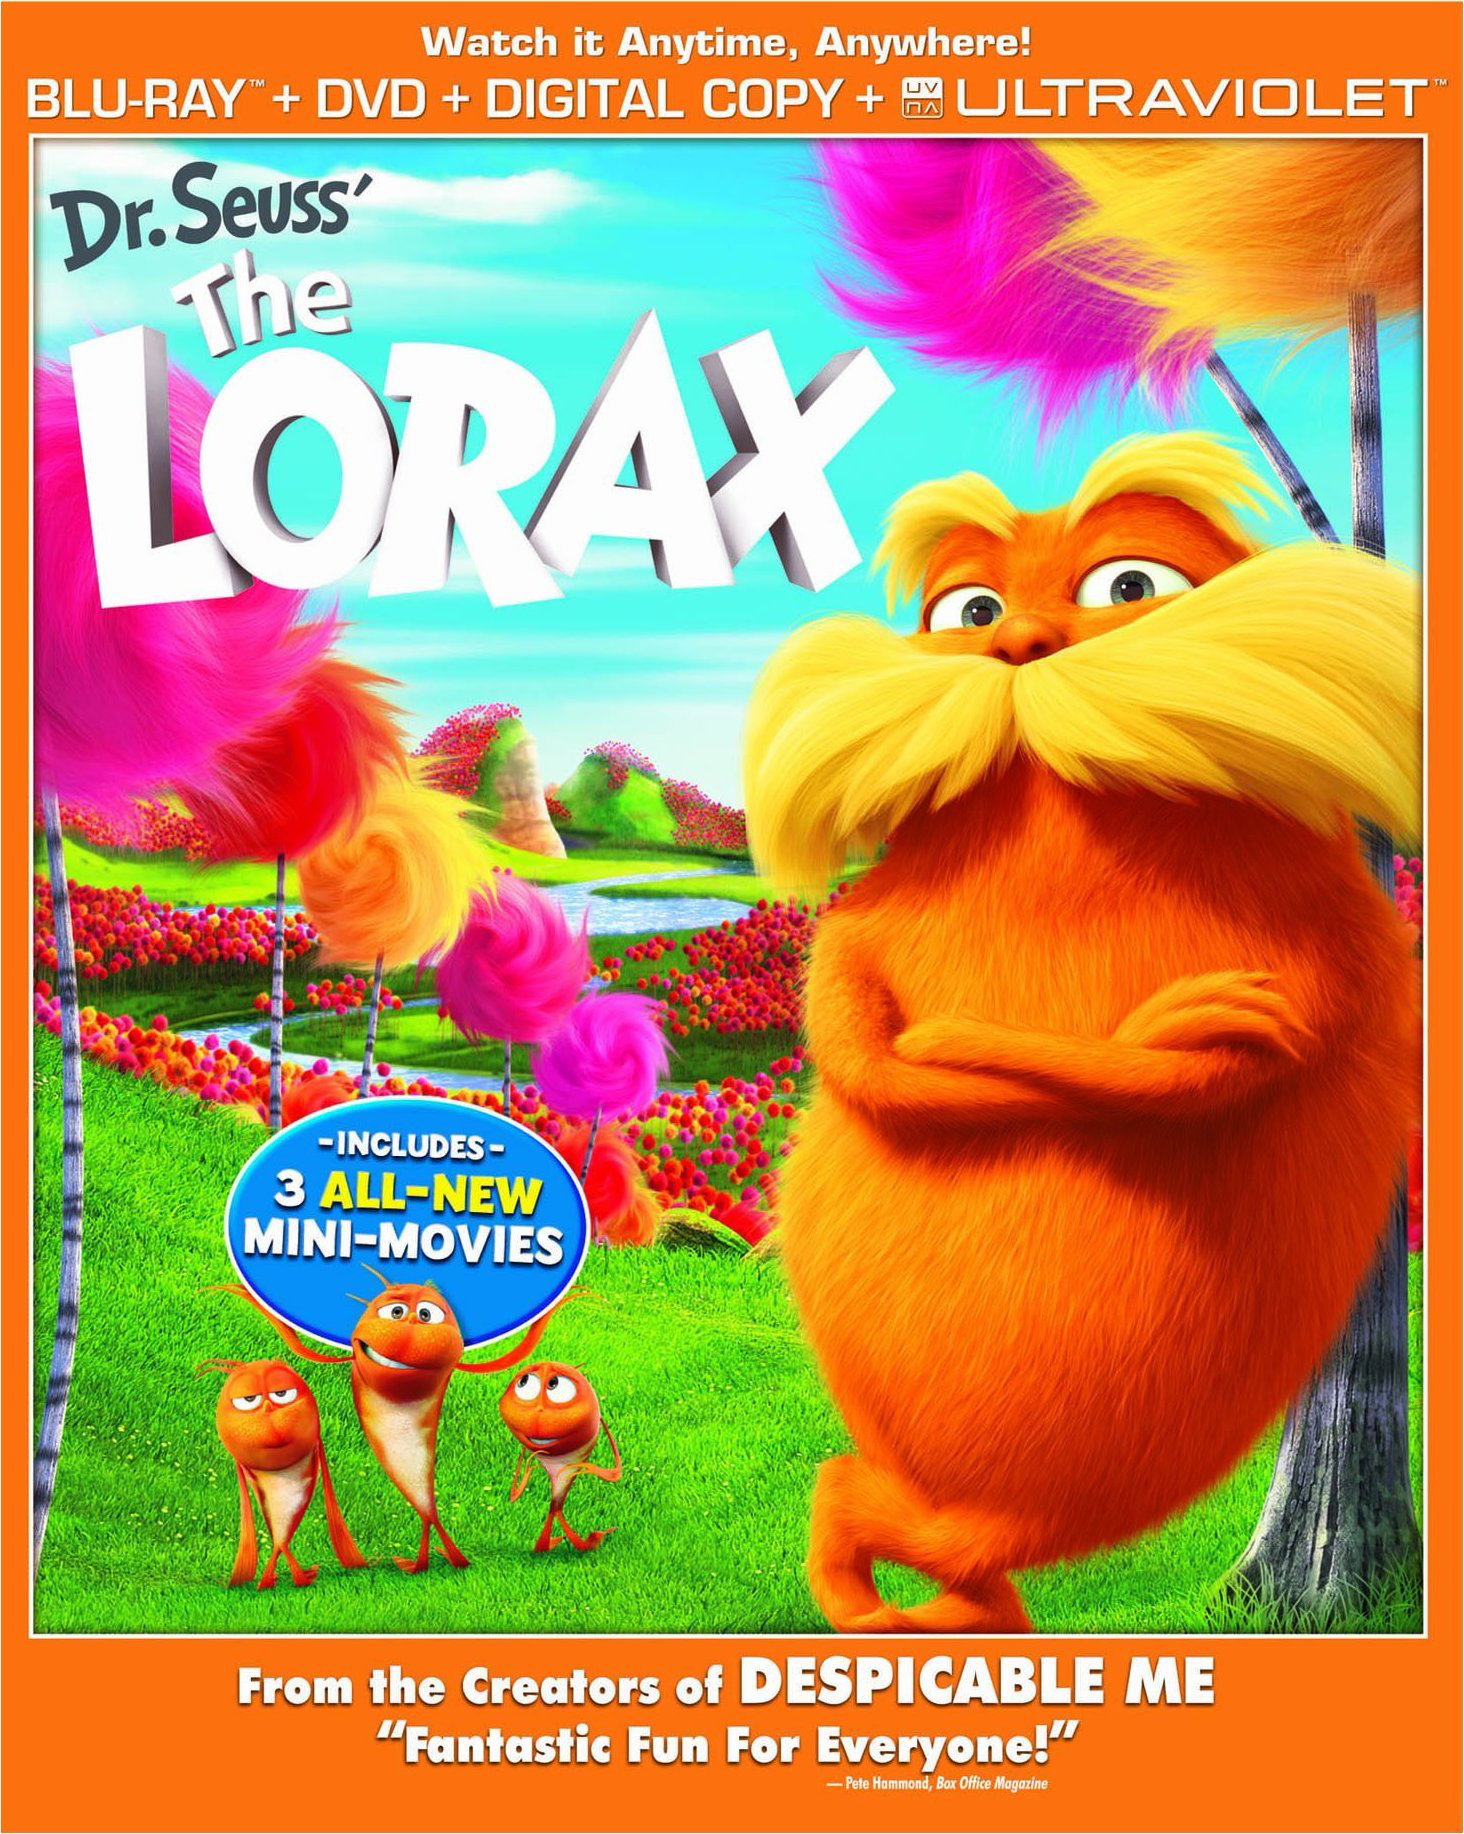 Blu-ray Sales, August 6-12: The Lorax Sits at the Top Spot